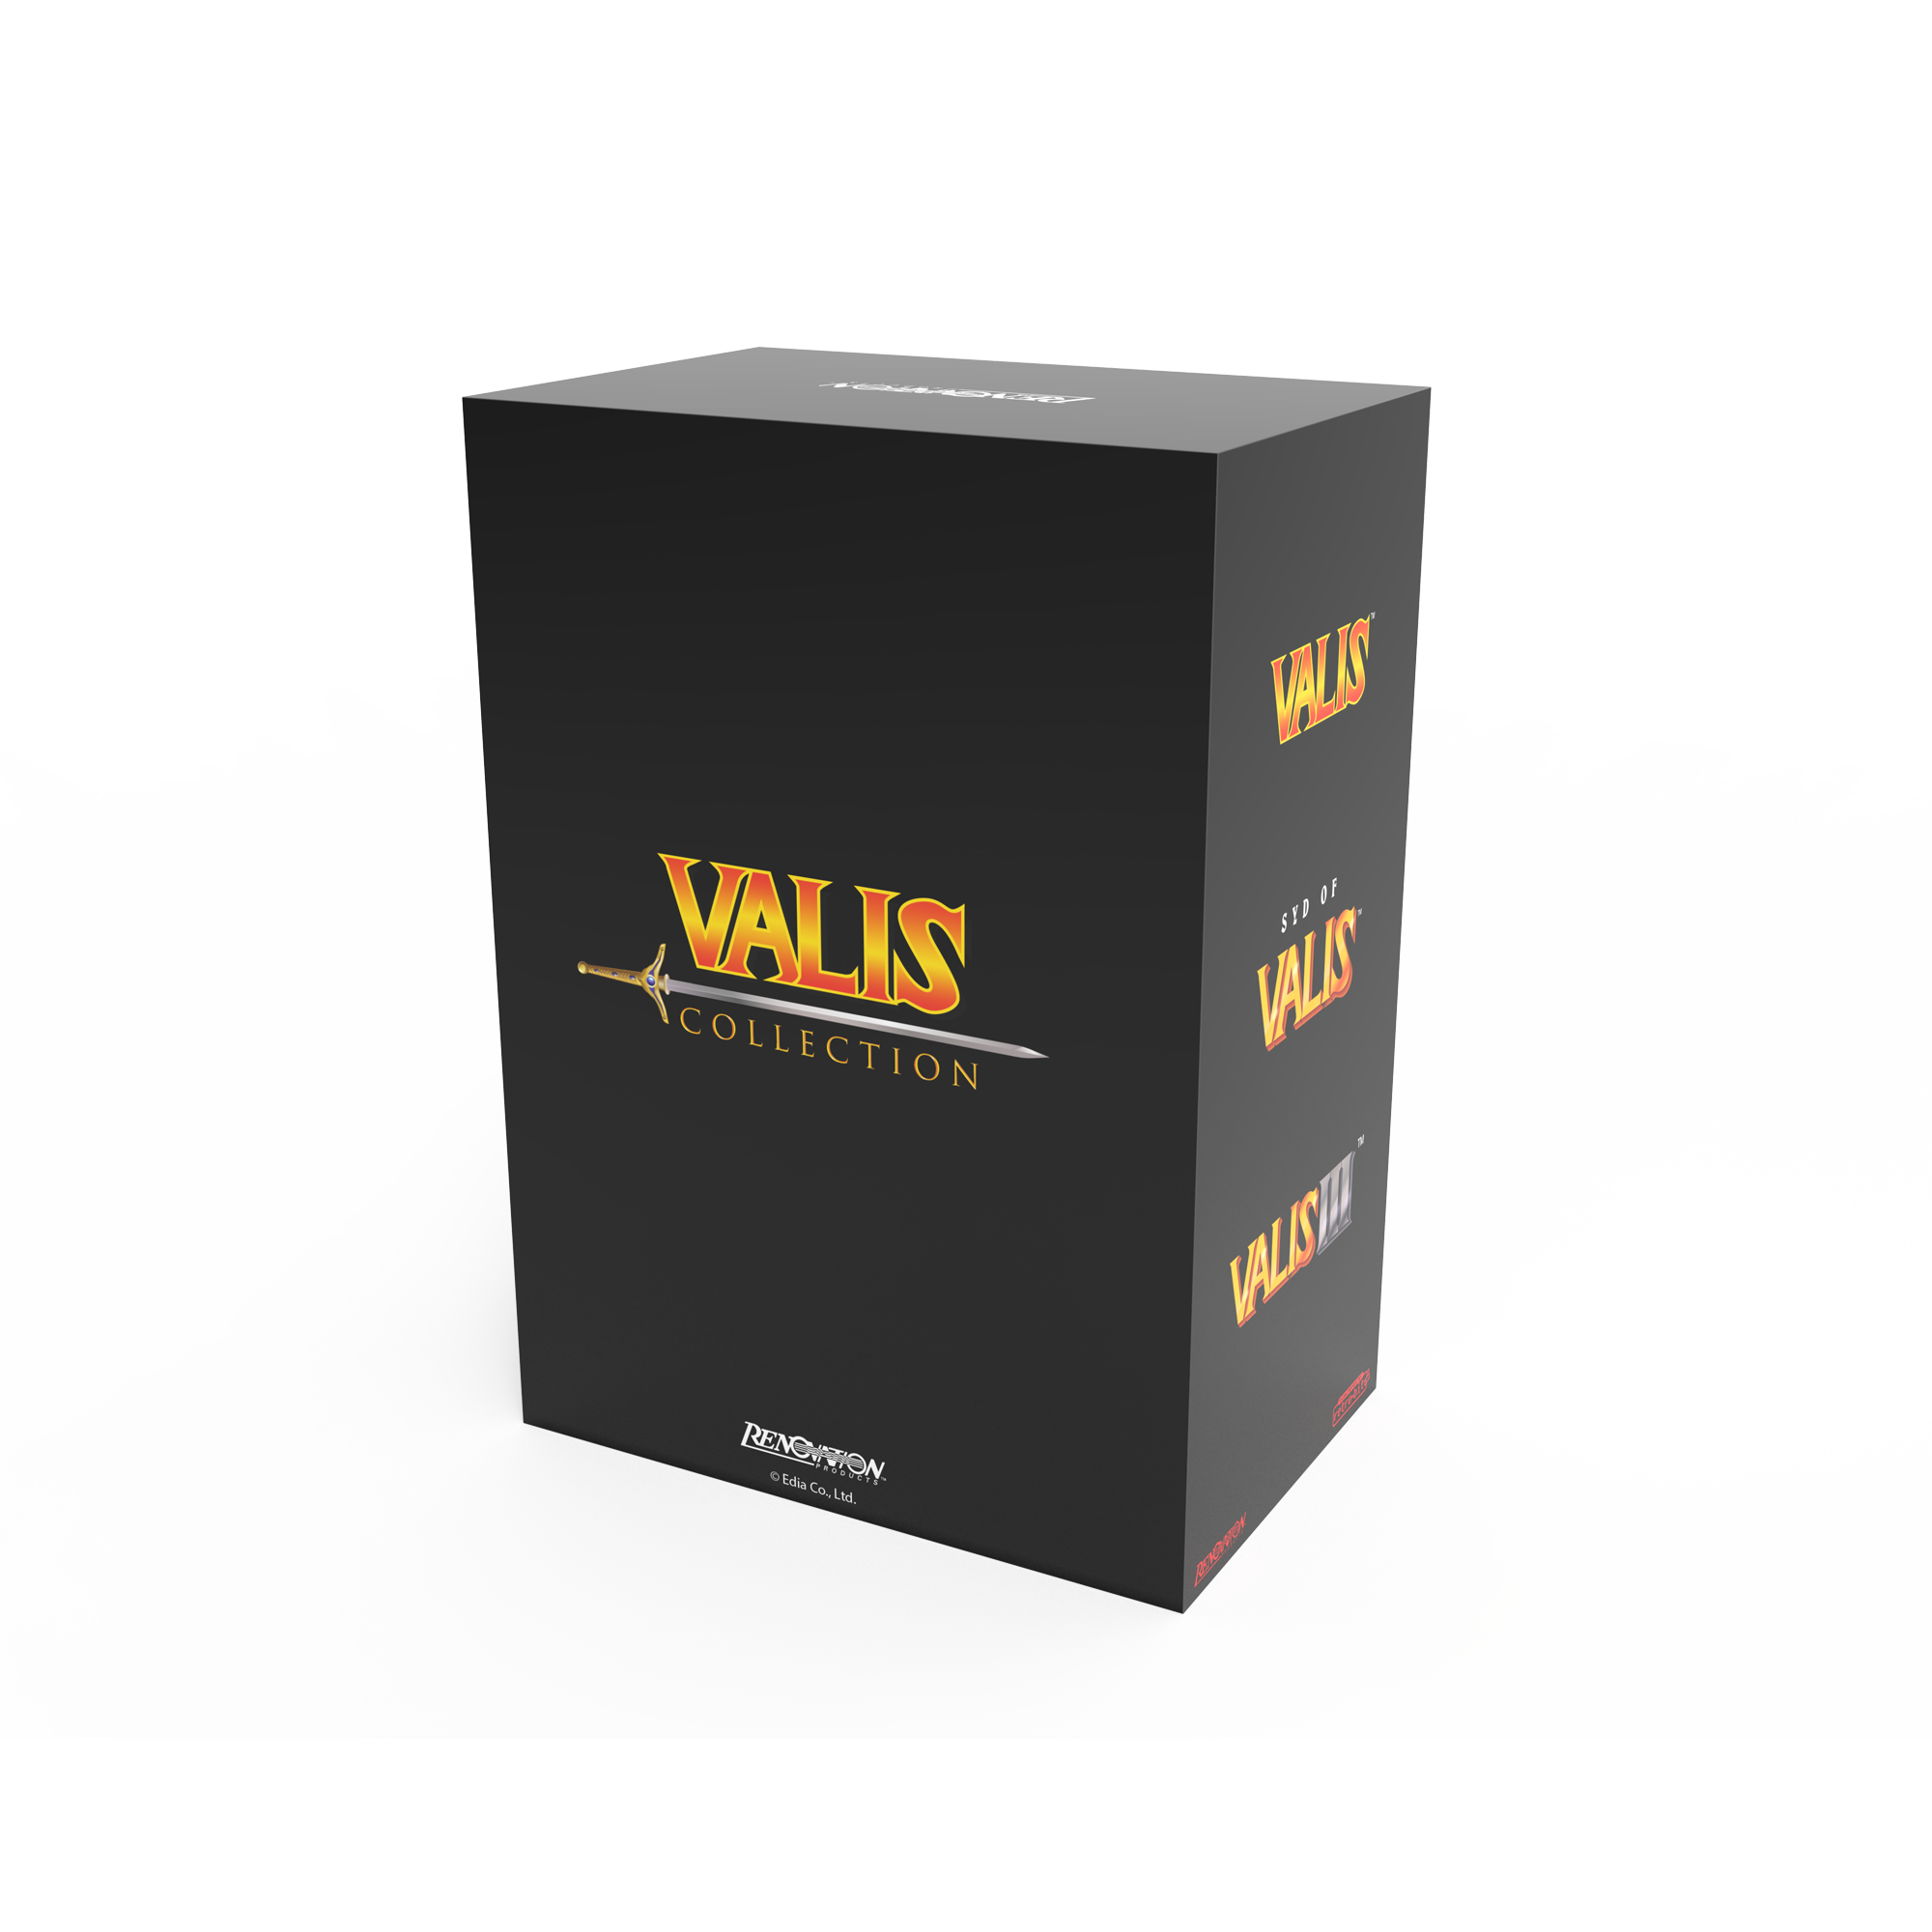 ValisCollectionPressKit Valis Collection Master Slipcase 02.png